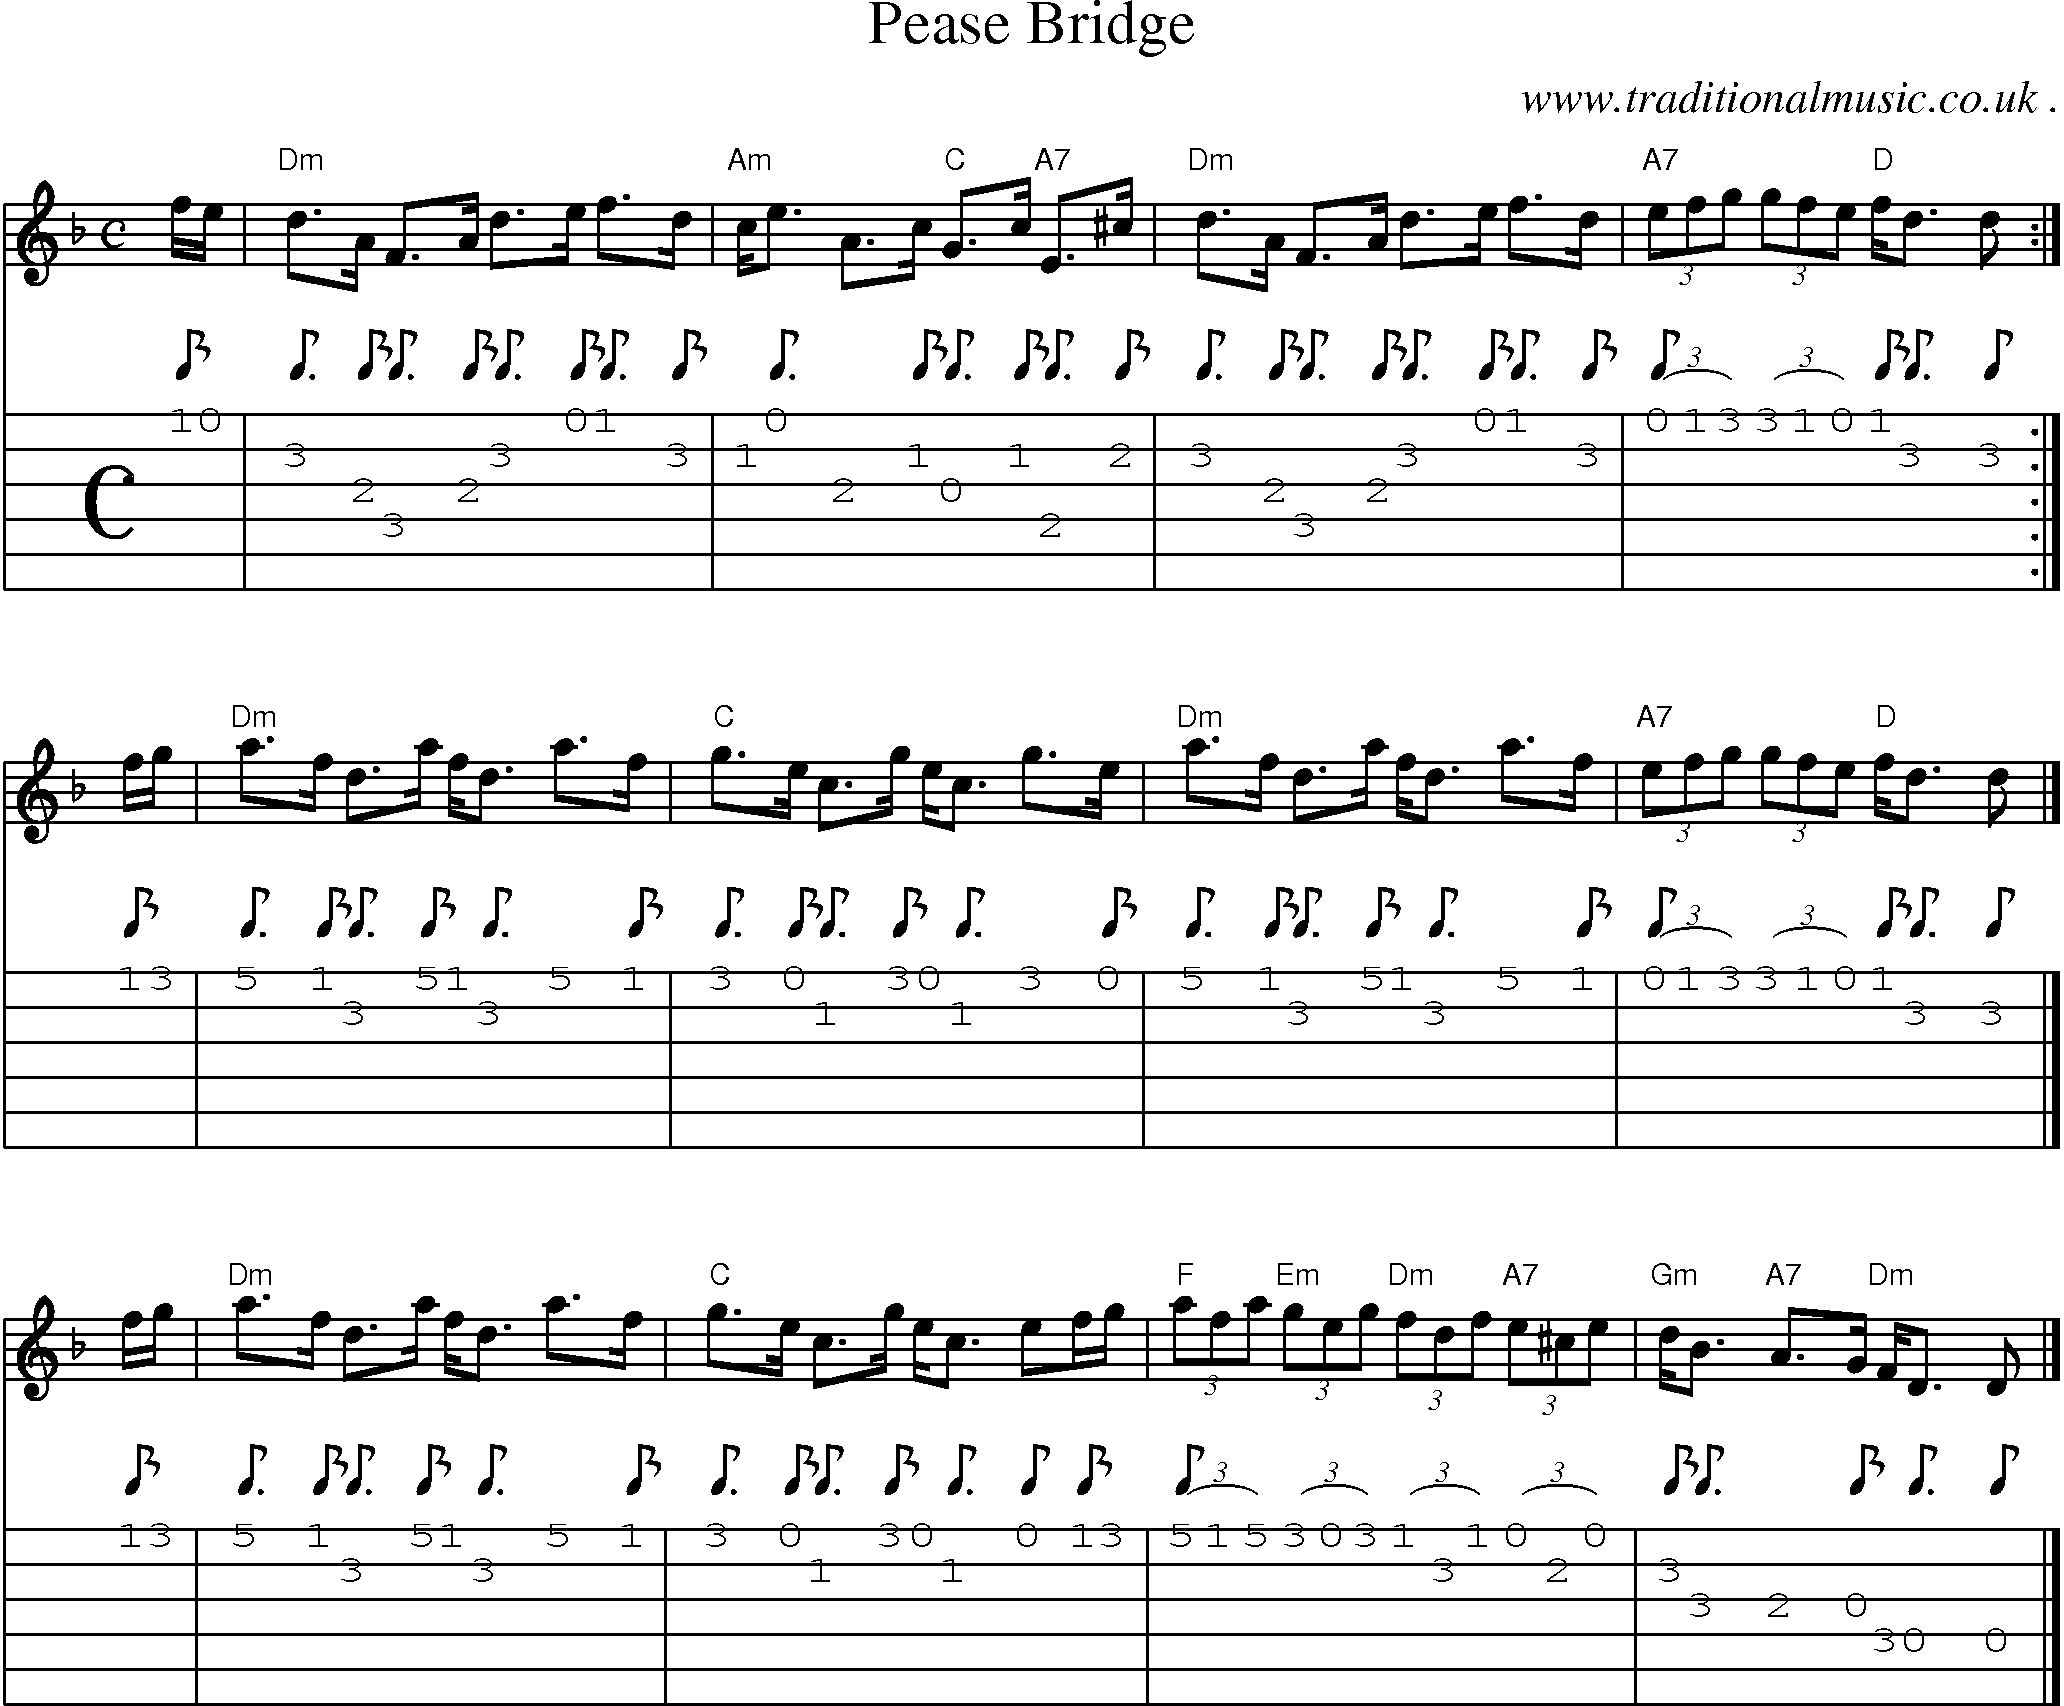 Sheet-music  score, Chords and Guitar Tabs for Pease Bridge